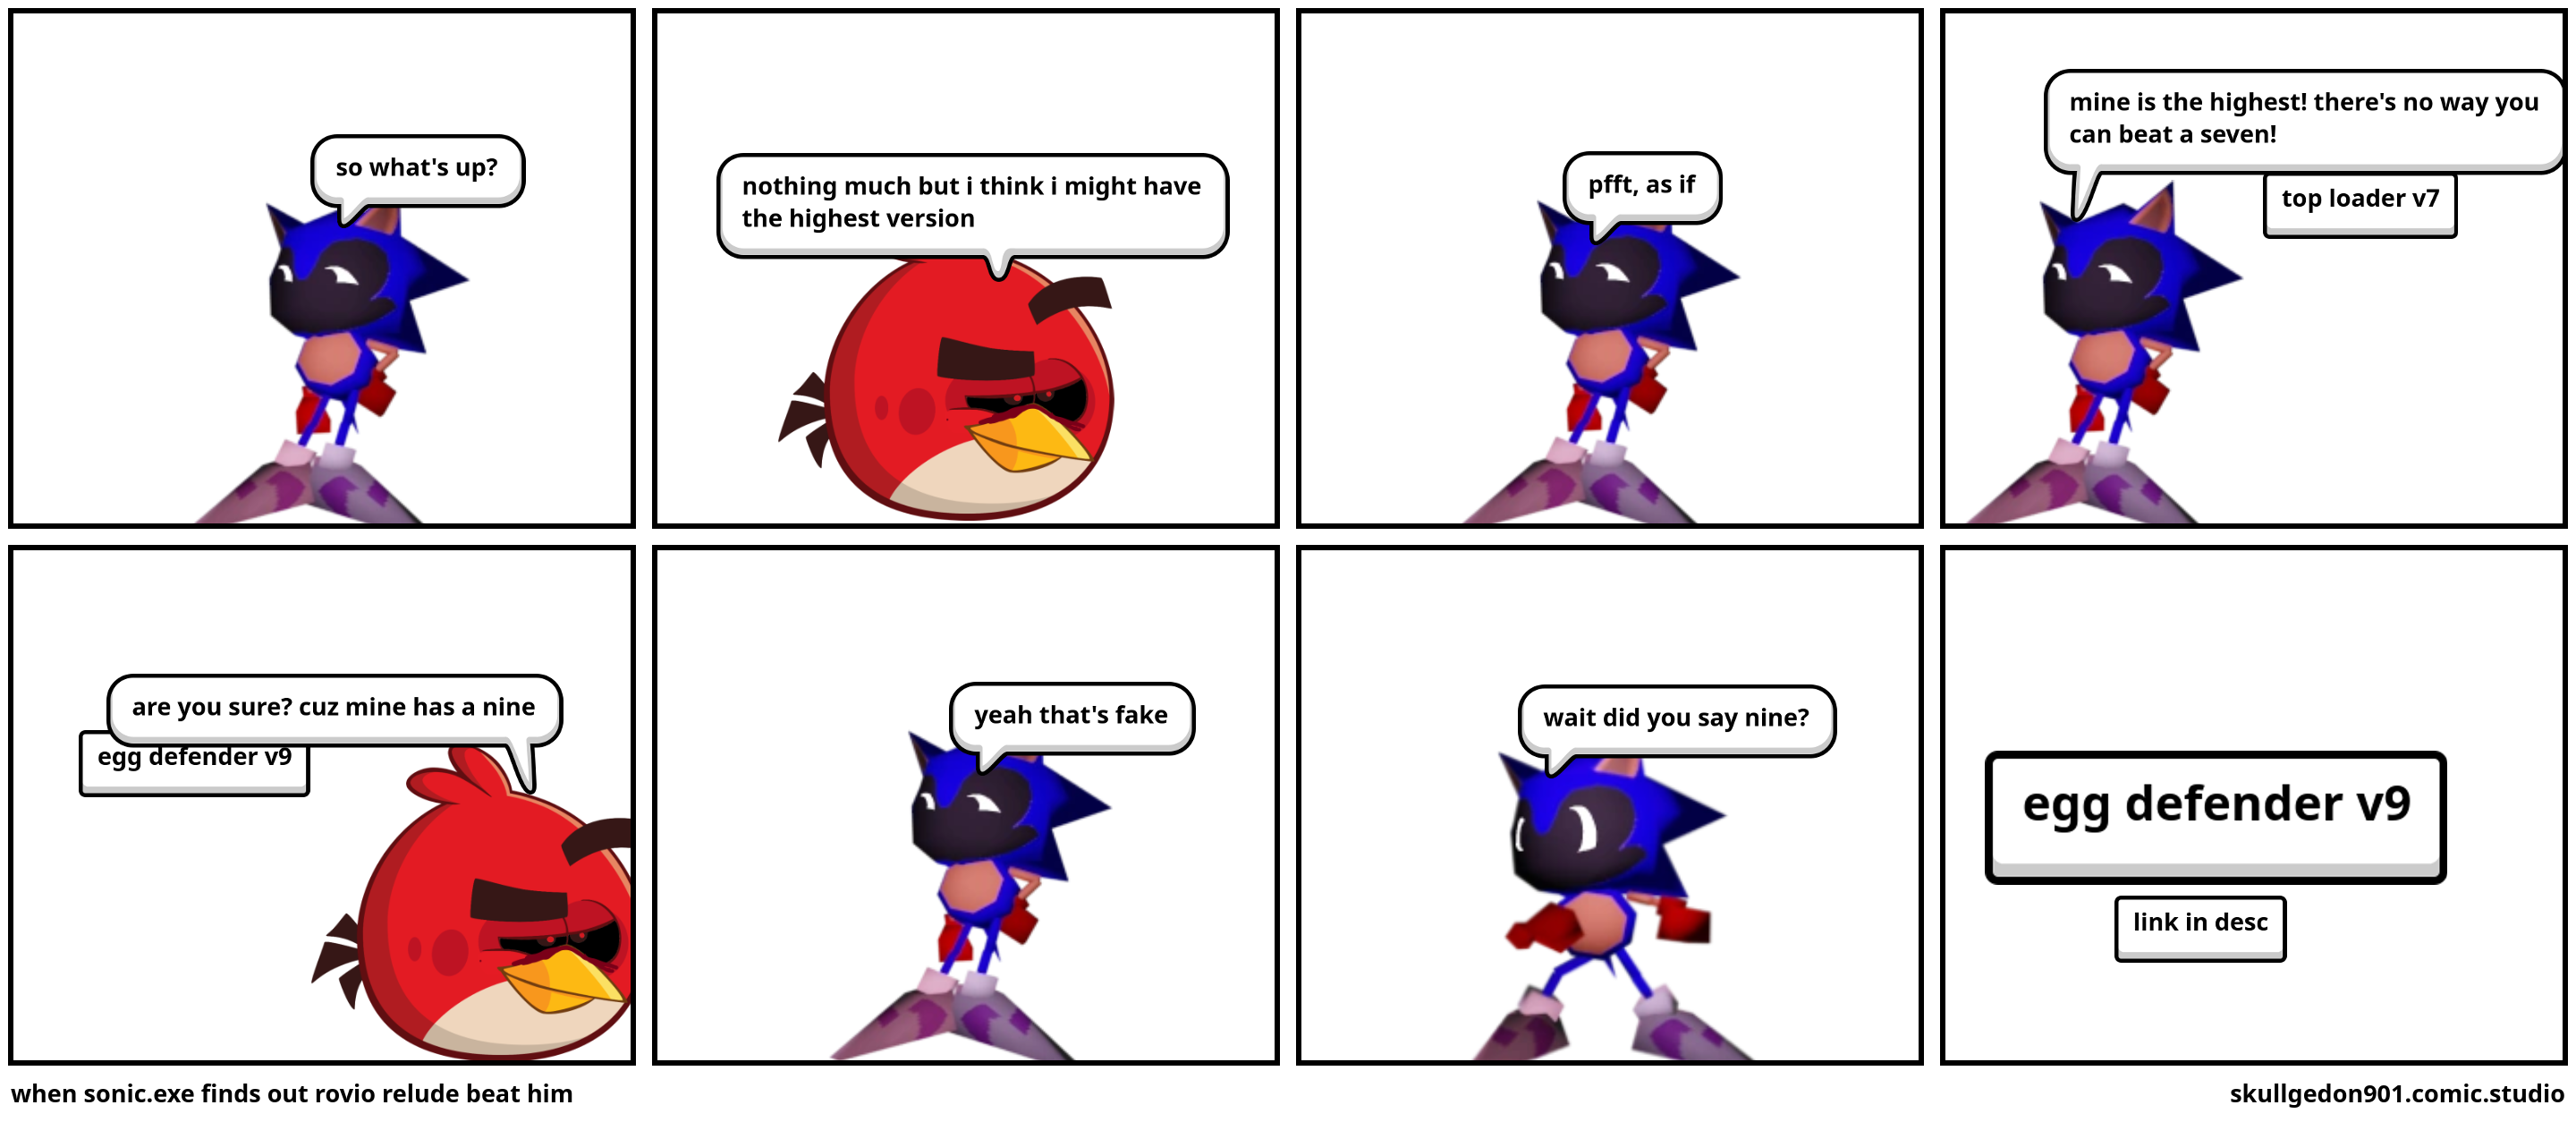 when sonic.exe finds out rovio relude beat him